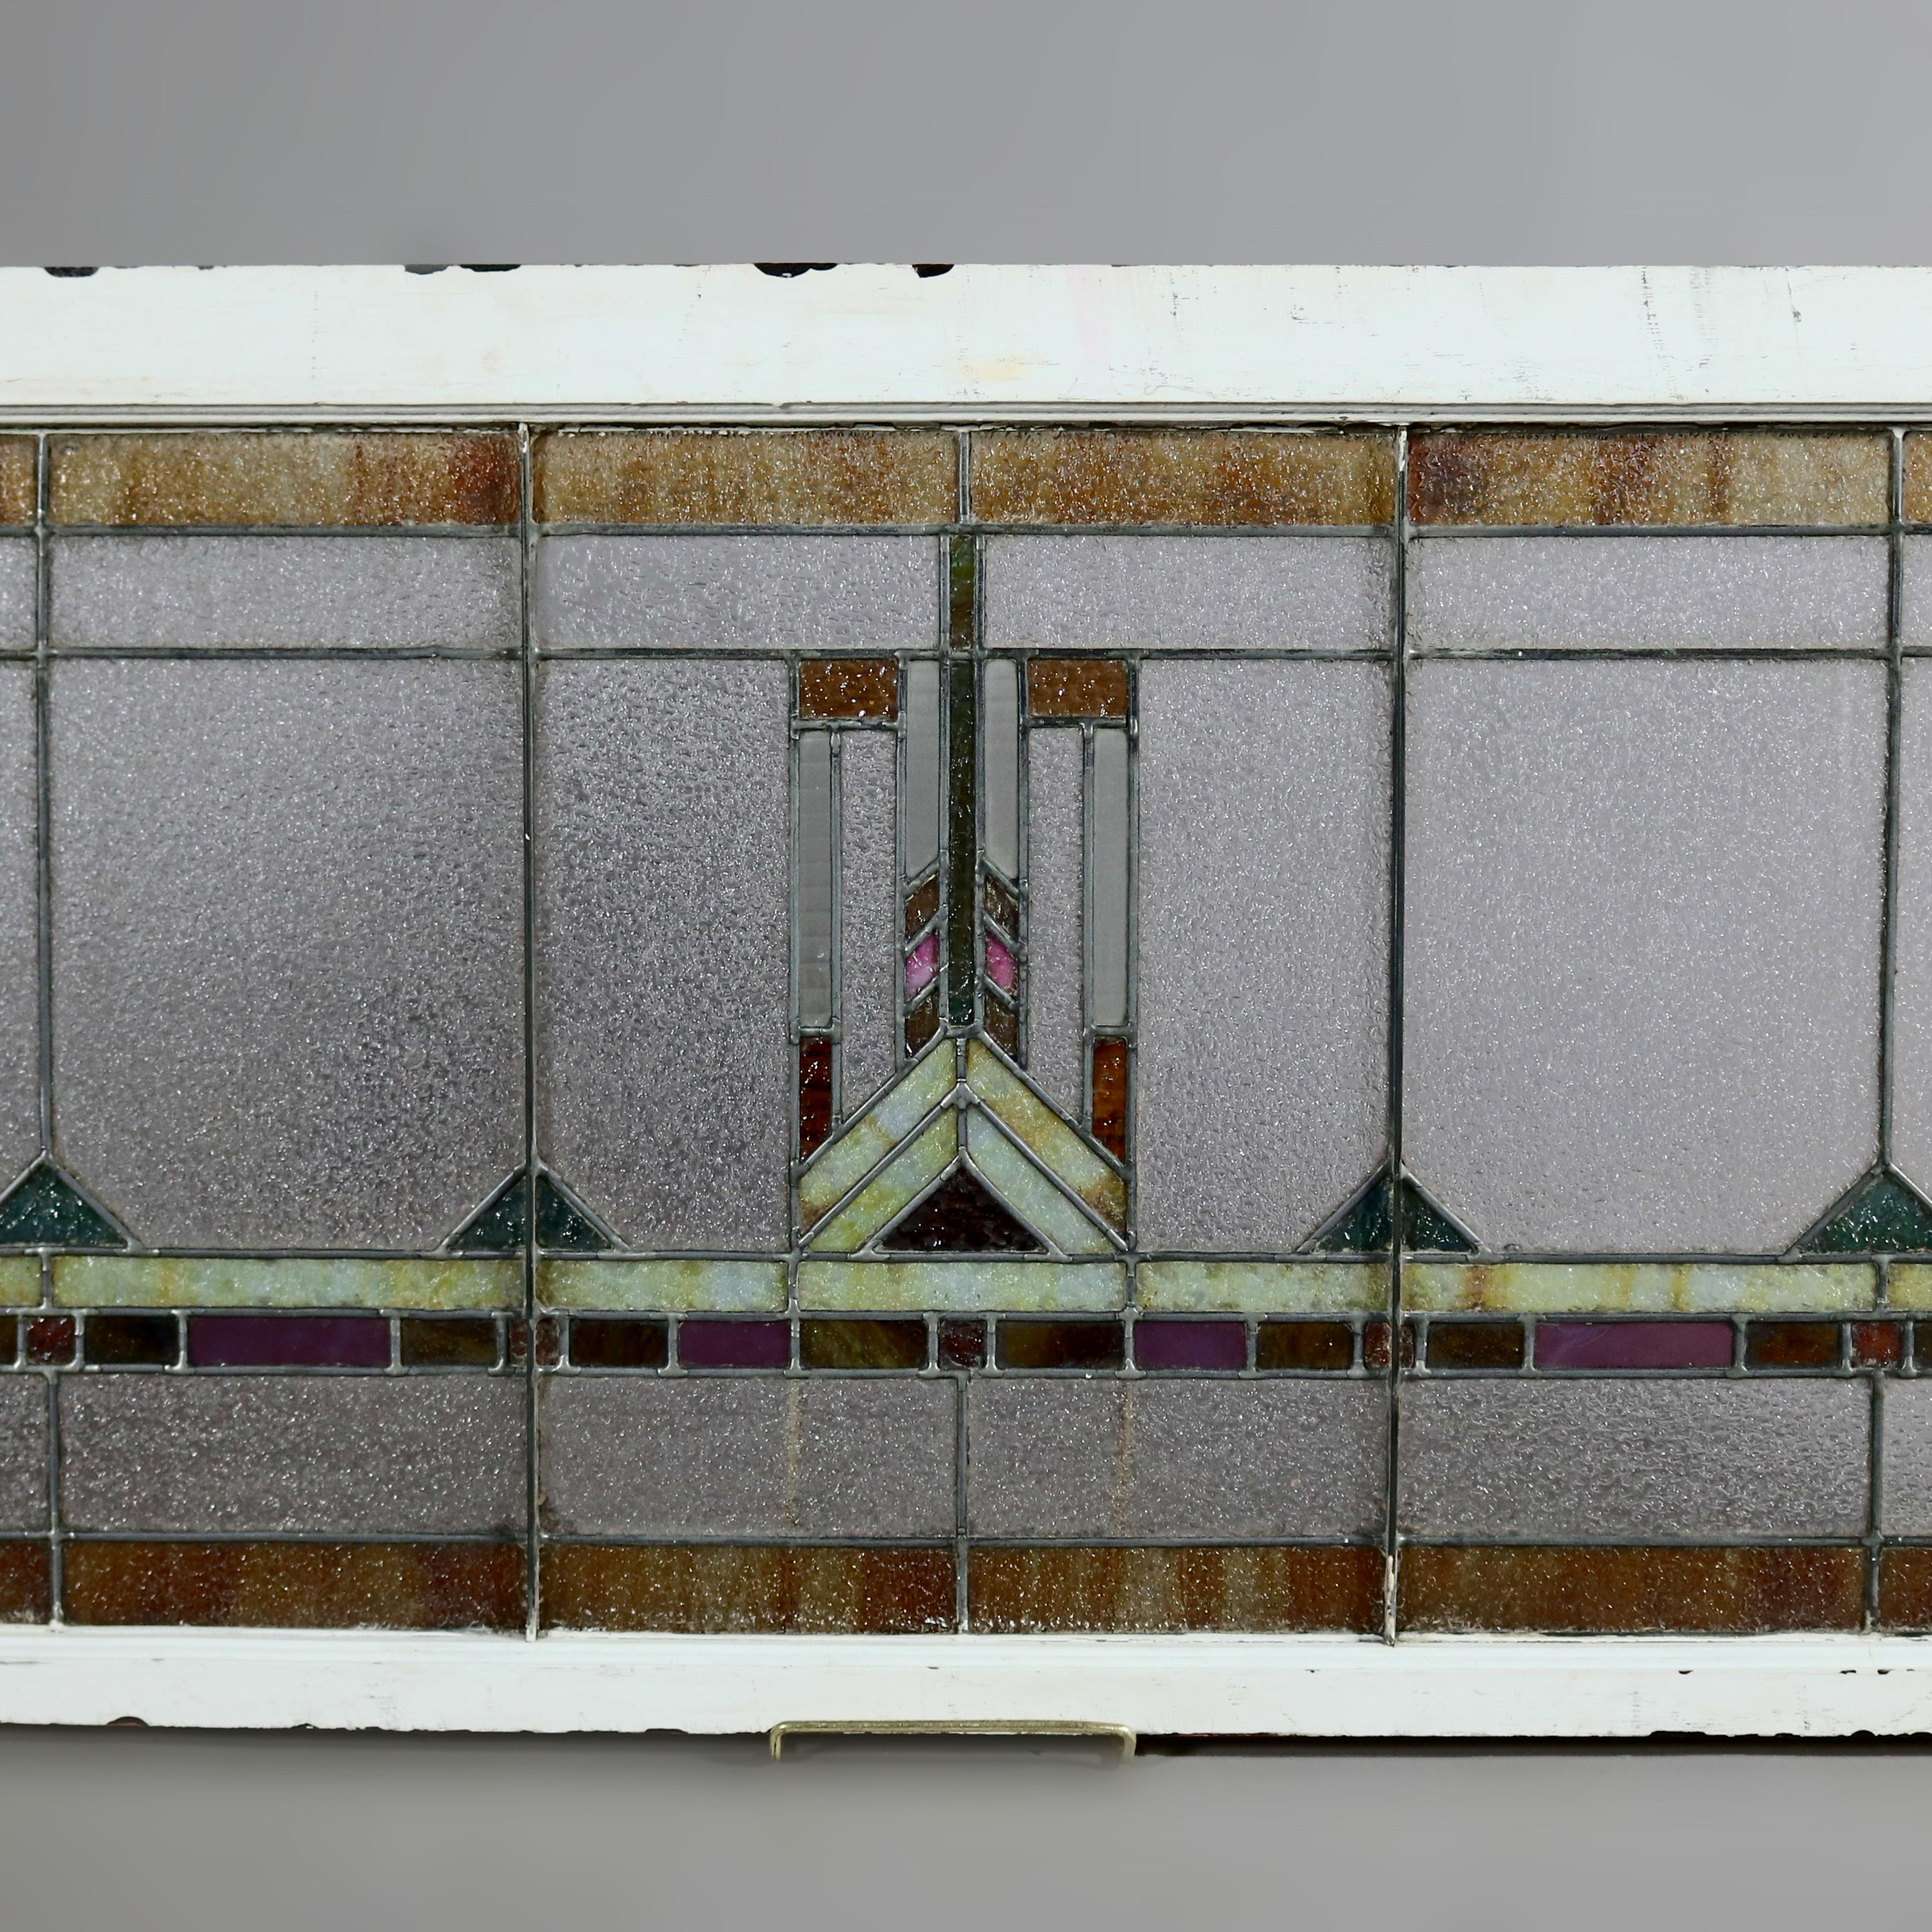 An Arts & Crafts Frank Lloyd Wright style window panel offers leaded stained glass in geometric form and having central stylized feather pattern, encased in wood window sash, circa 1910.

Measures: overall 46.5